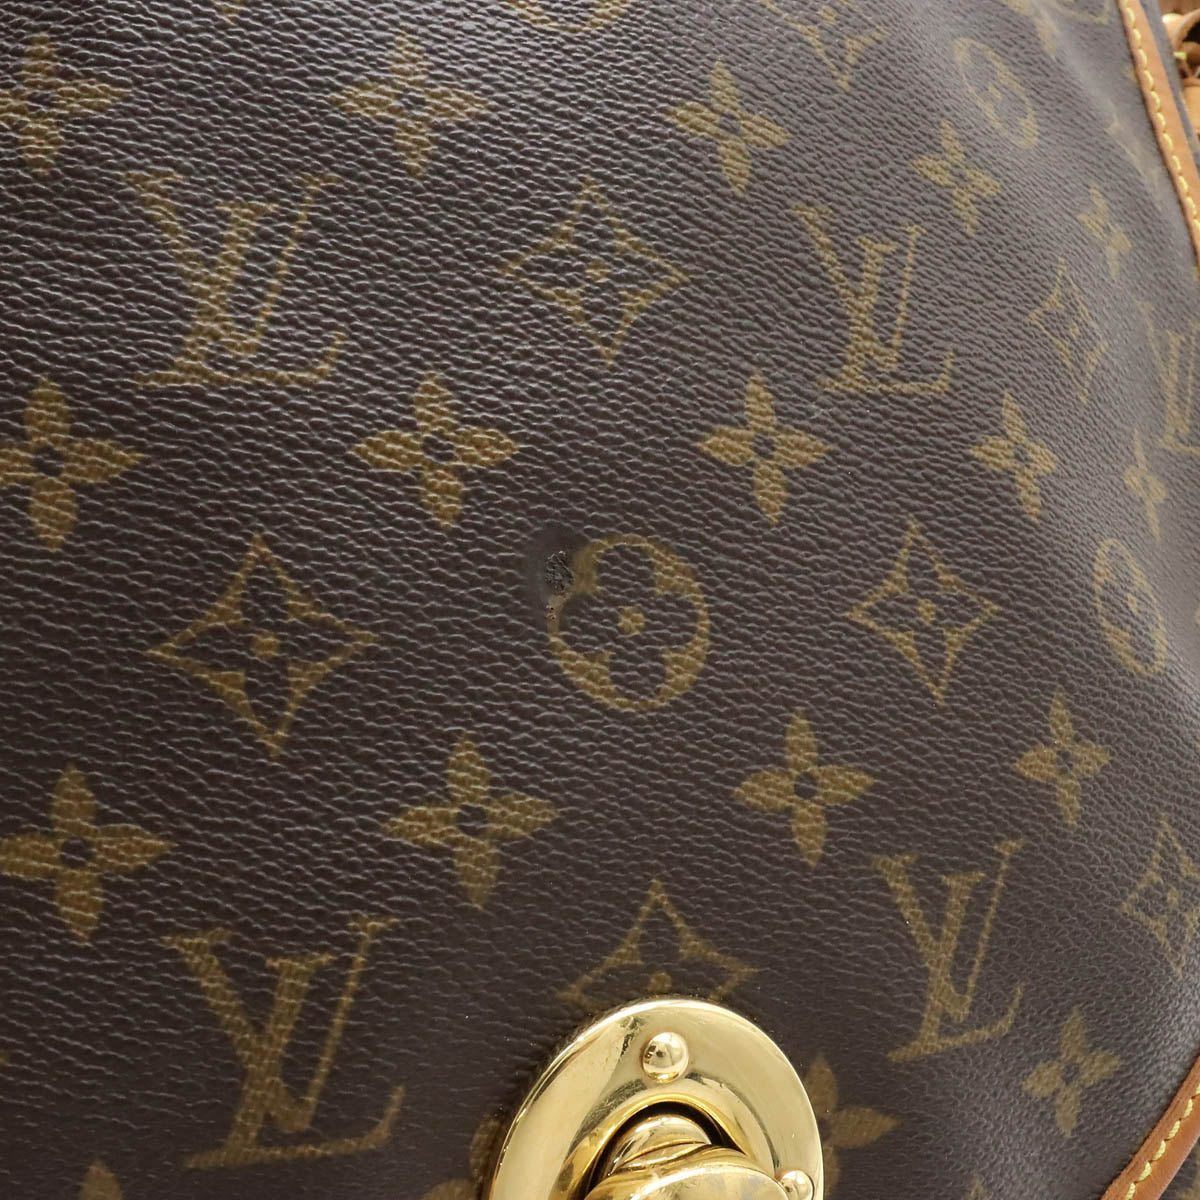 LOUIS VUITTON Authentic Monogram Looping MM Shoulder Bag Used from Japan